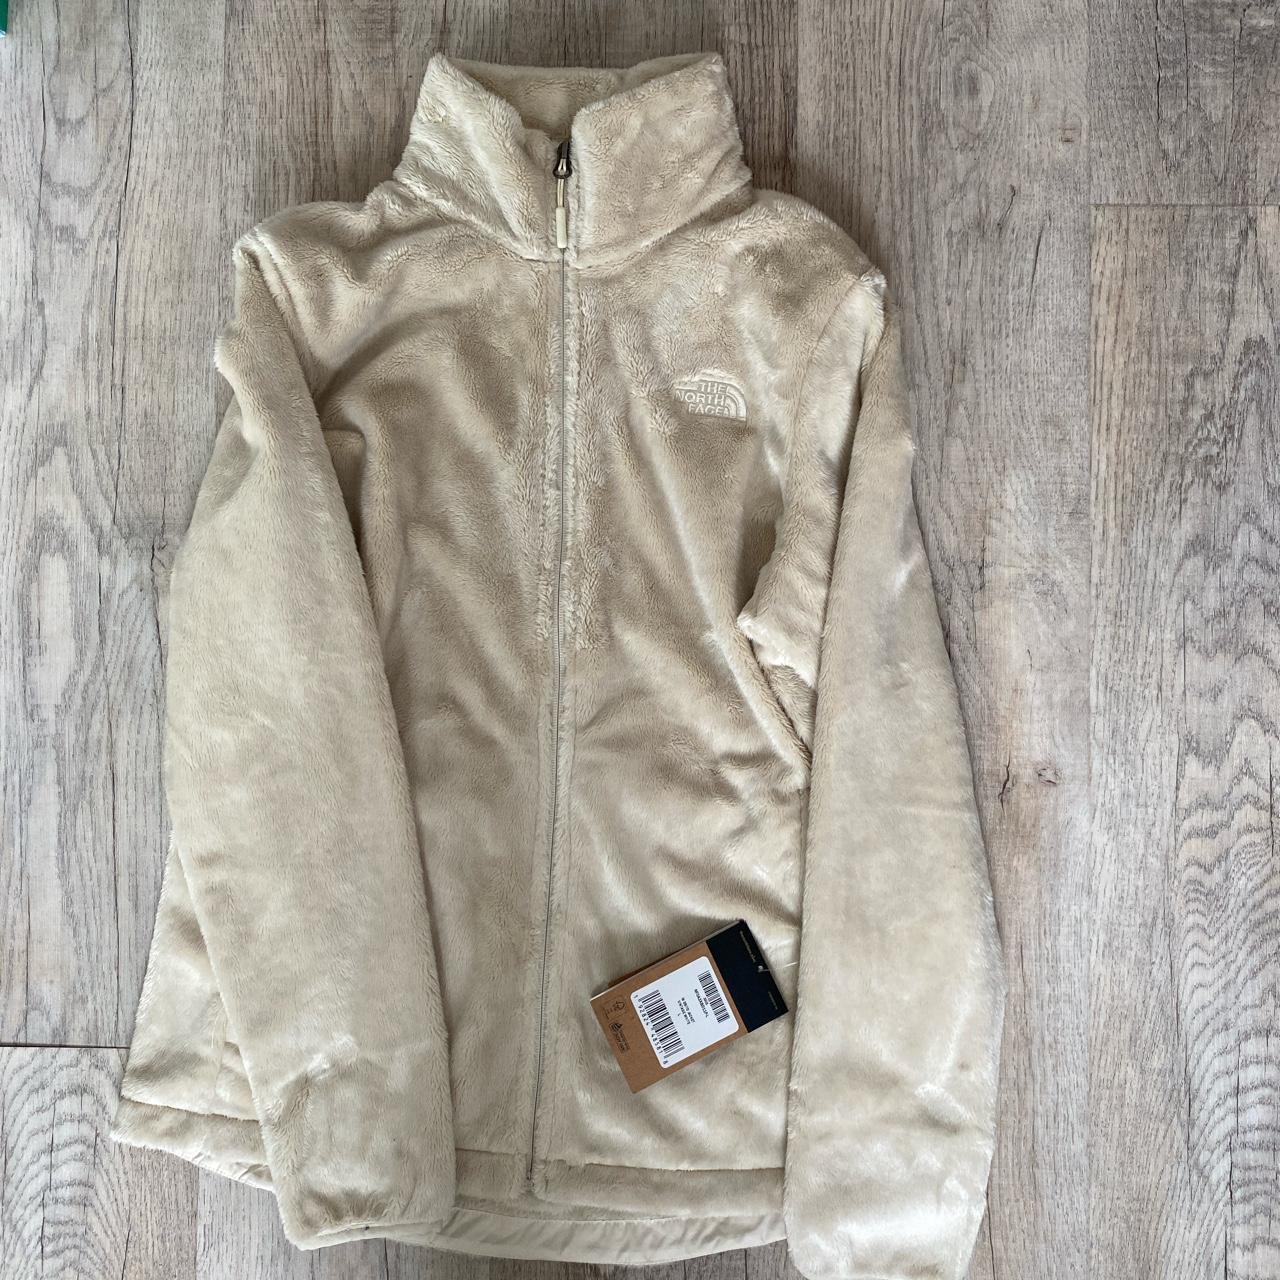 North face osito fleece in vintage white - size... - Depop